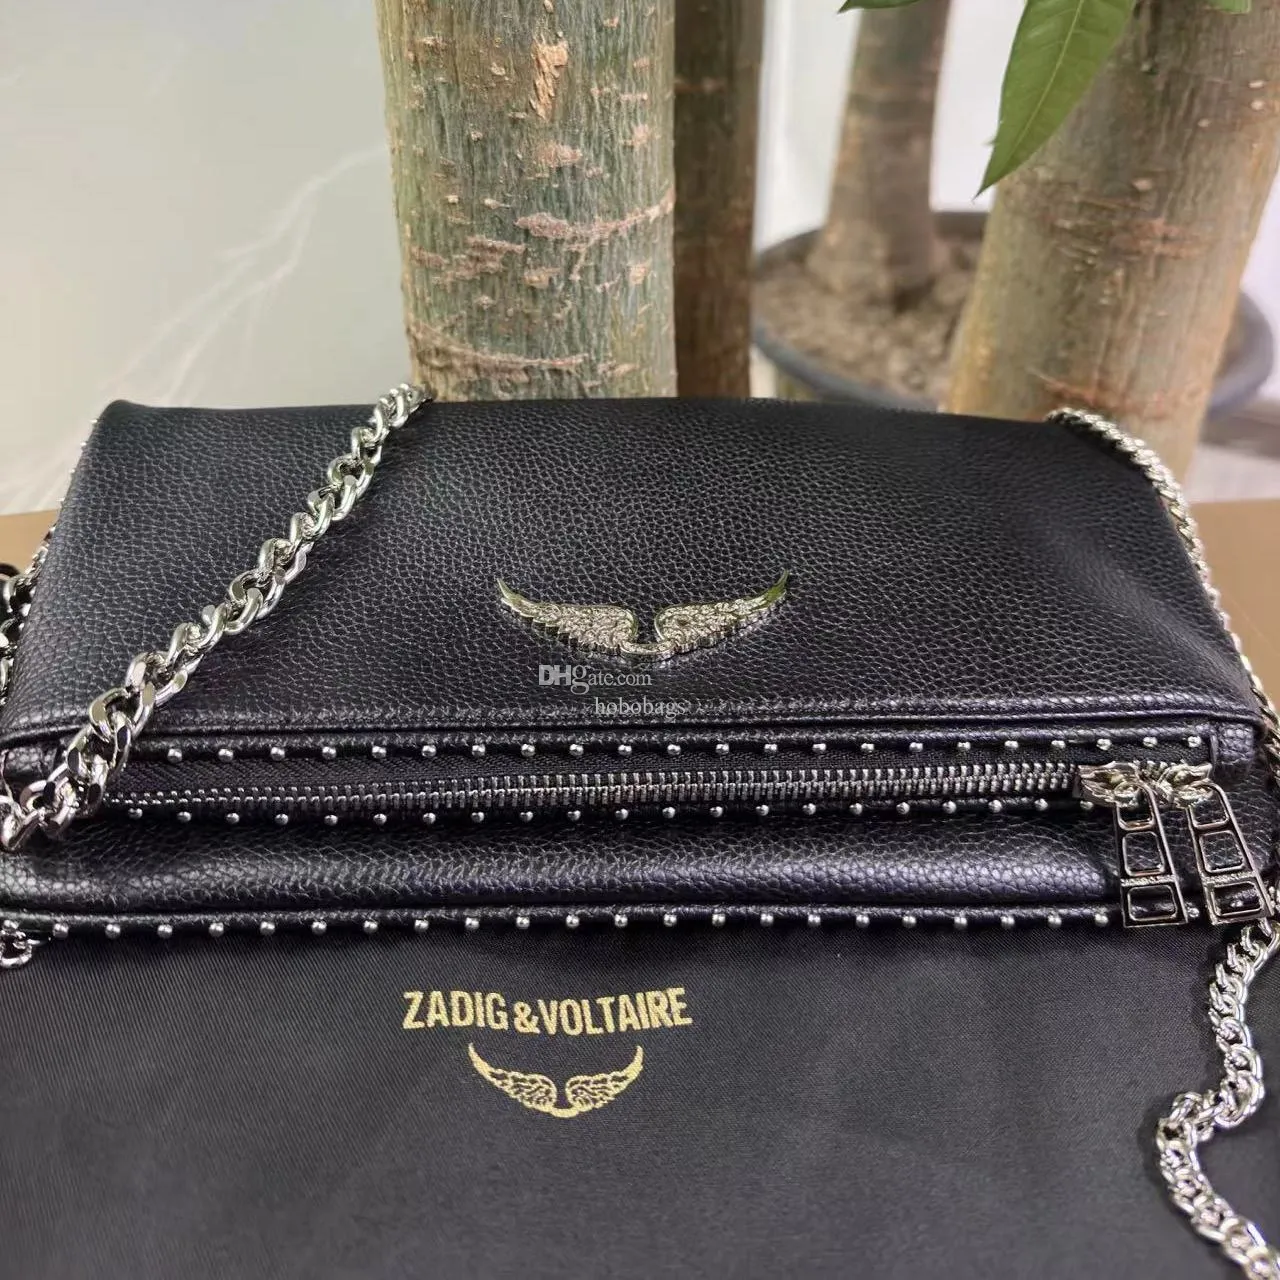 Zadig & Voltaire Genuine Leather Shoulder Bag - Vintage Rivet Design with  Crossbody Chain, High-Grade Quality with Original Box